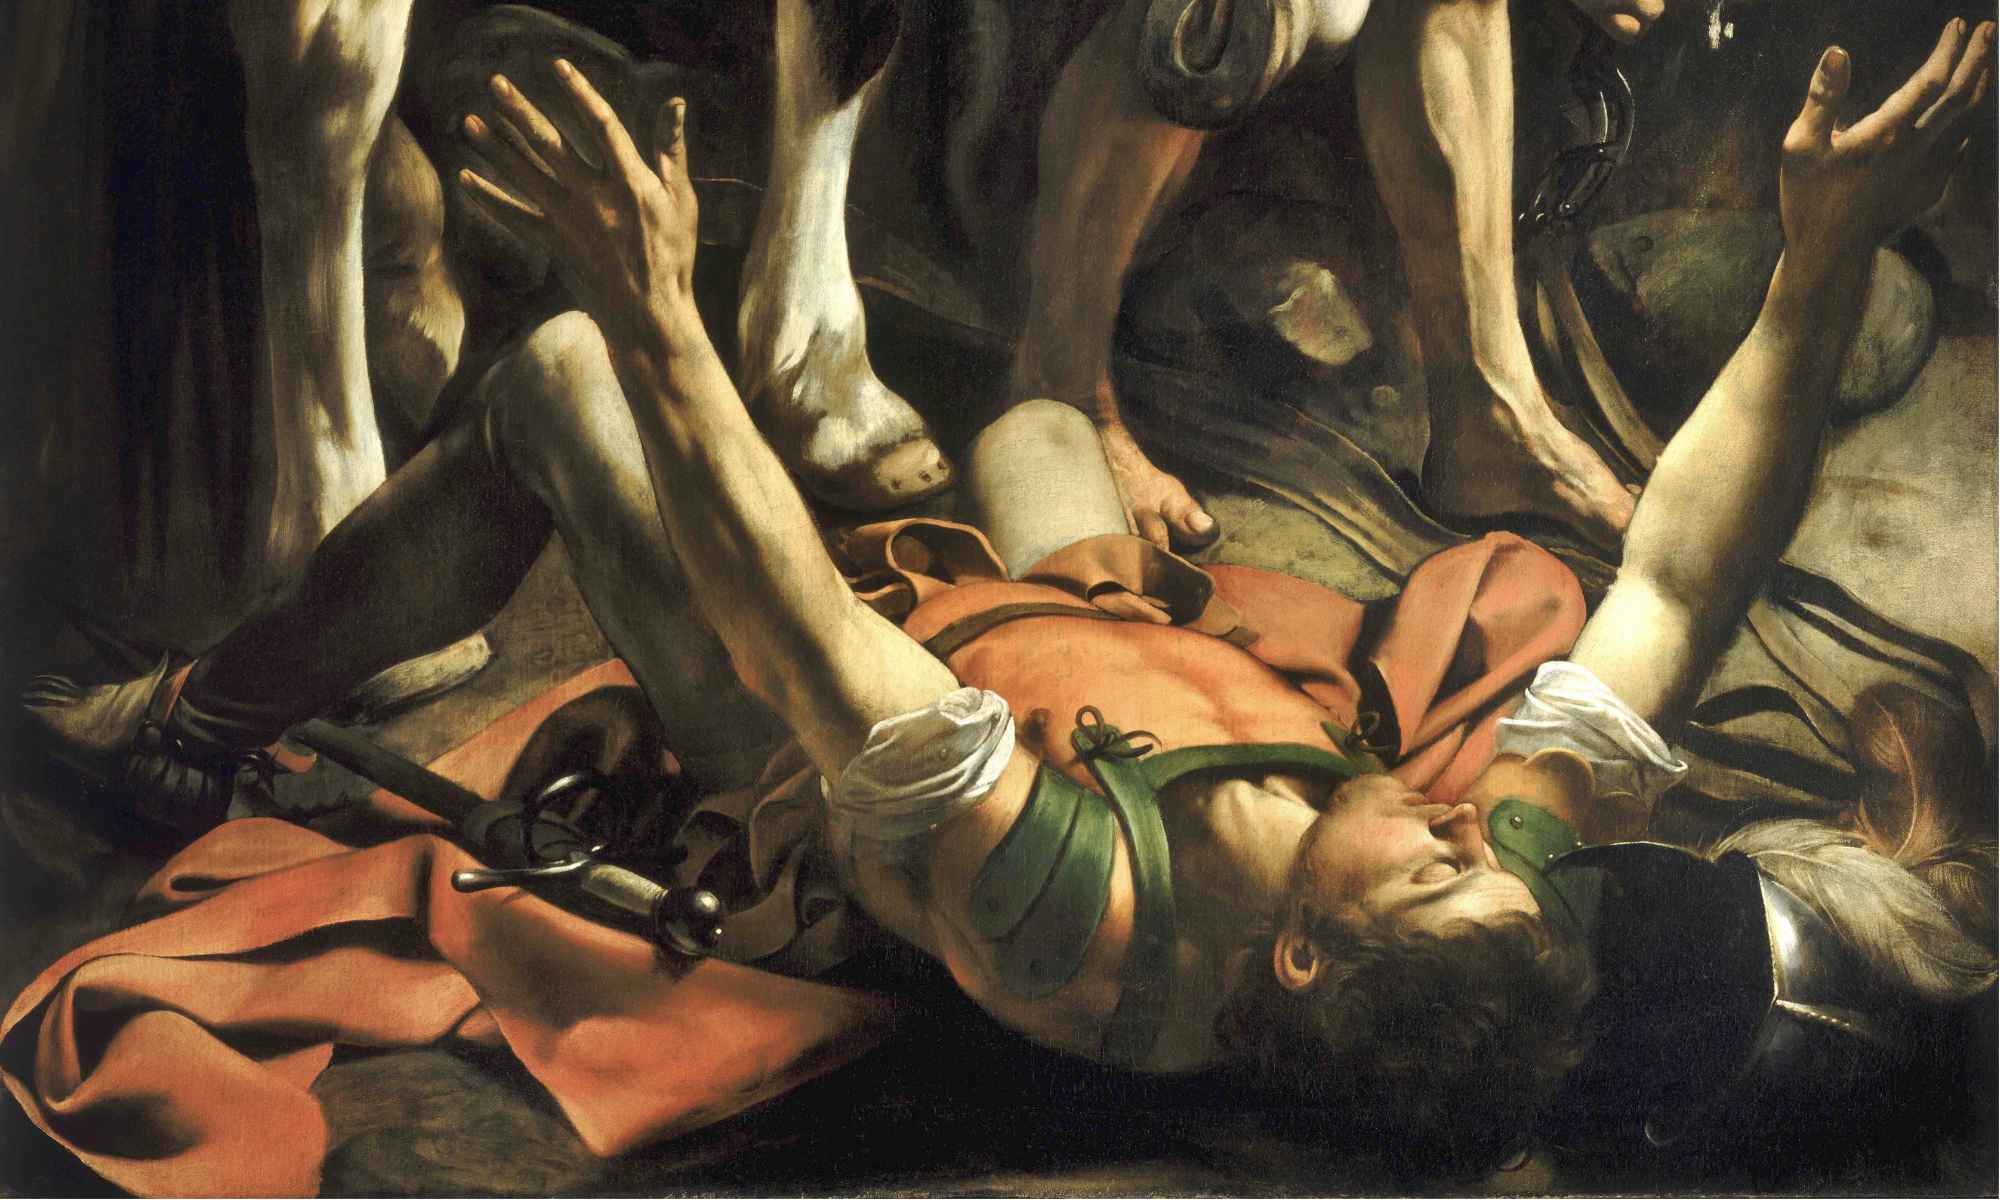 Detail of Caravaggio's "The Conversion of Saint Paul" shows Saul sprawled on the ground beneath a horse's legs, blinded and with his arms raised. A crop of the painting serves as the cover art for Jennifer Grotz's "Still Falling: Poems."